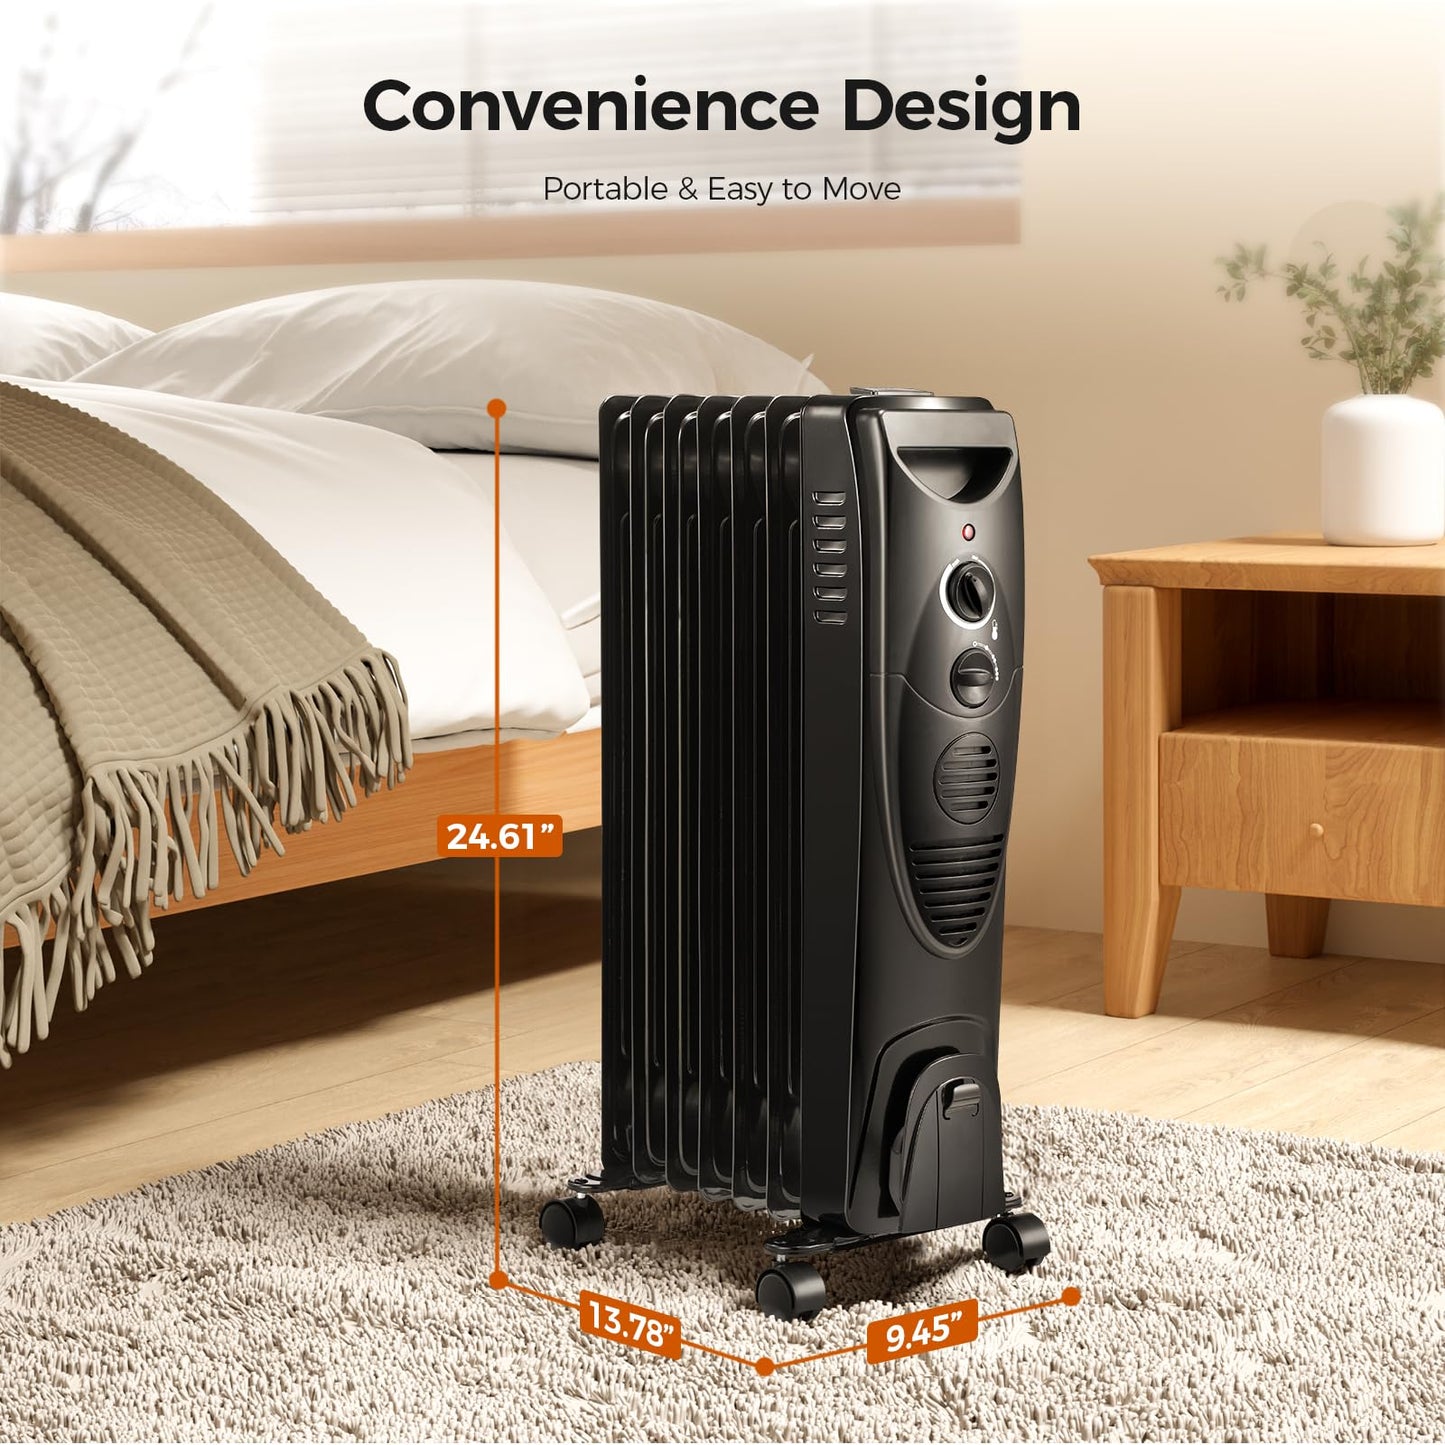 Kismile Portable Electric Radiator Heater, Oil Filled with 3 Heat Settings, Adjustable Thermostat, Overheat & Tip-Over Protection For indoor use, 1500W (Black)